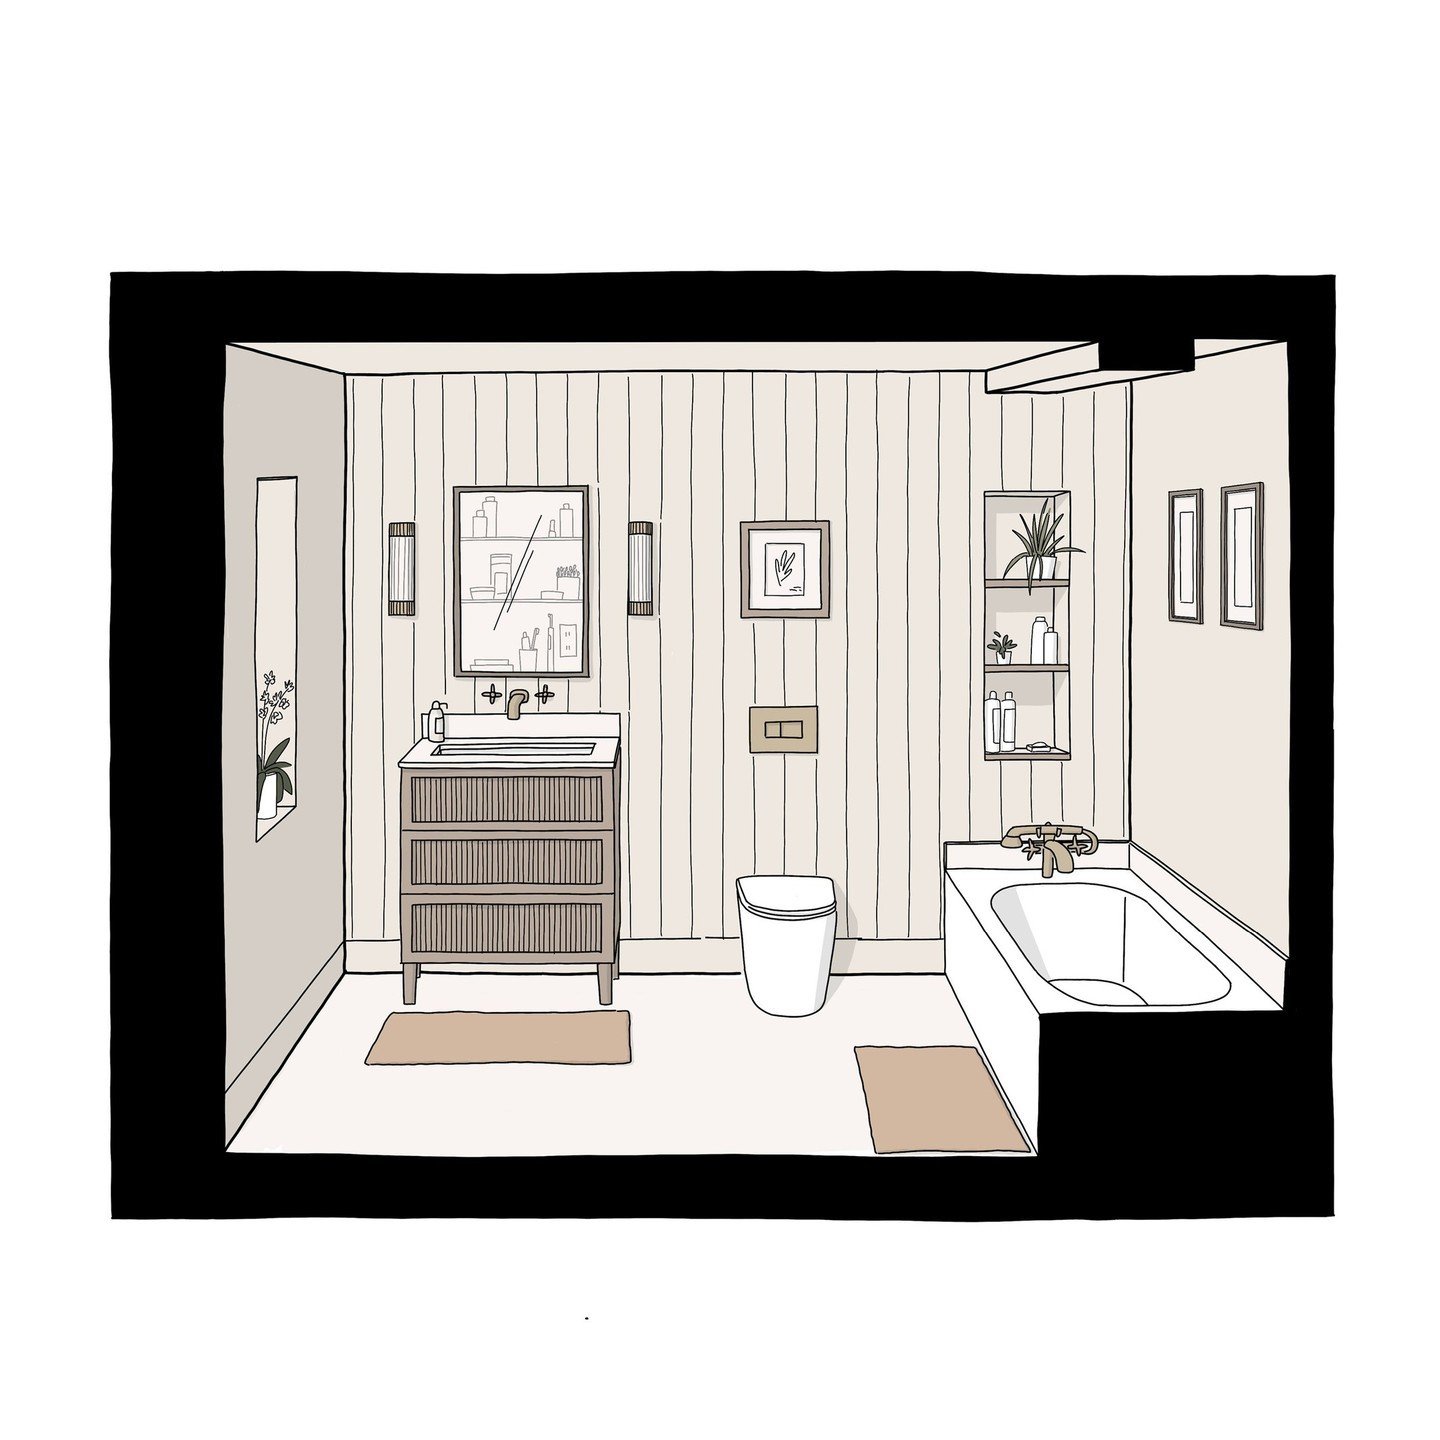 Another bathroom&hellip; although this is one I actually designed! Over the past year, I&rsquo;ve developed a bit of a niche in this style of drawing - if you have an idea for your space but can&rsquo;t visualise it - let me know and I&rsquo;d be hap